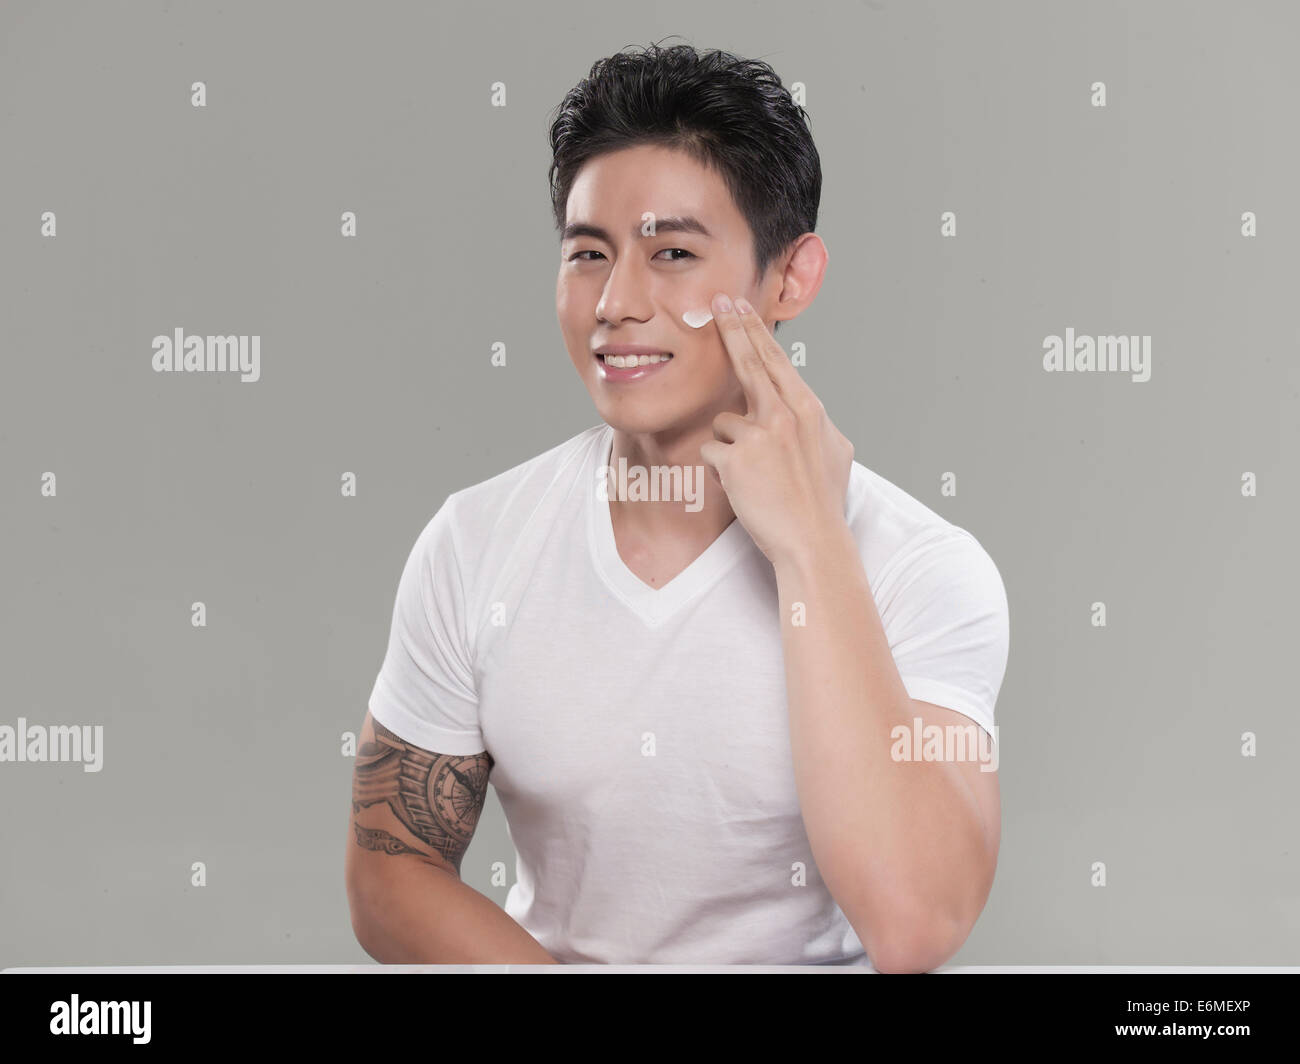 Asian Young Handsome Man Posing Stock Photo